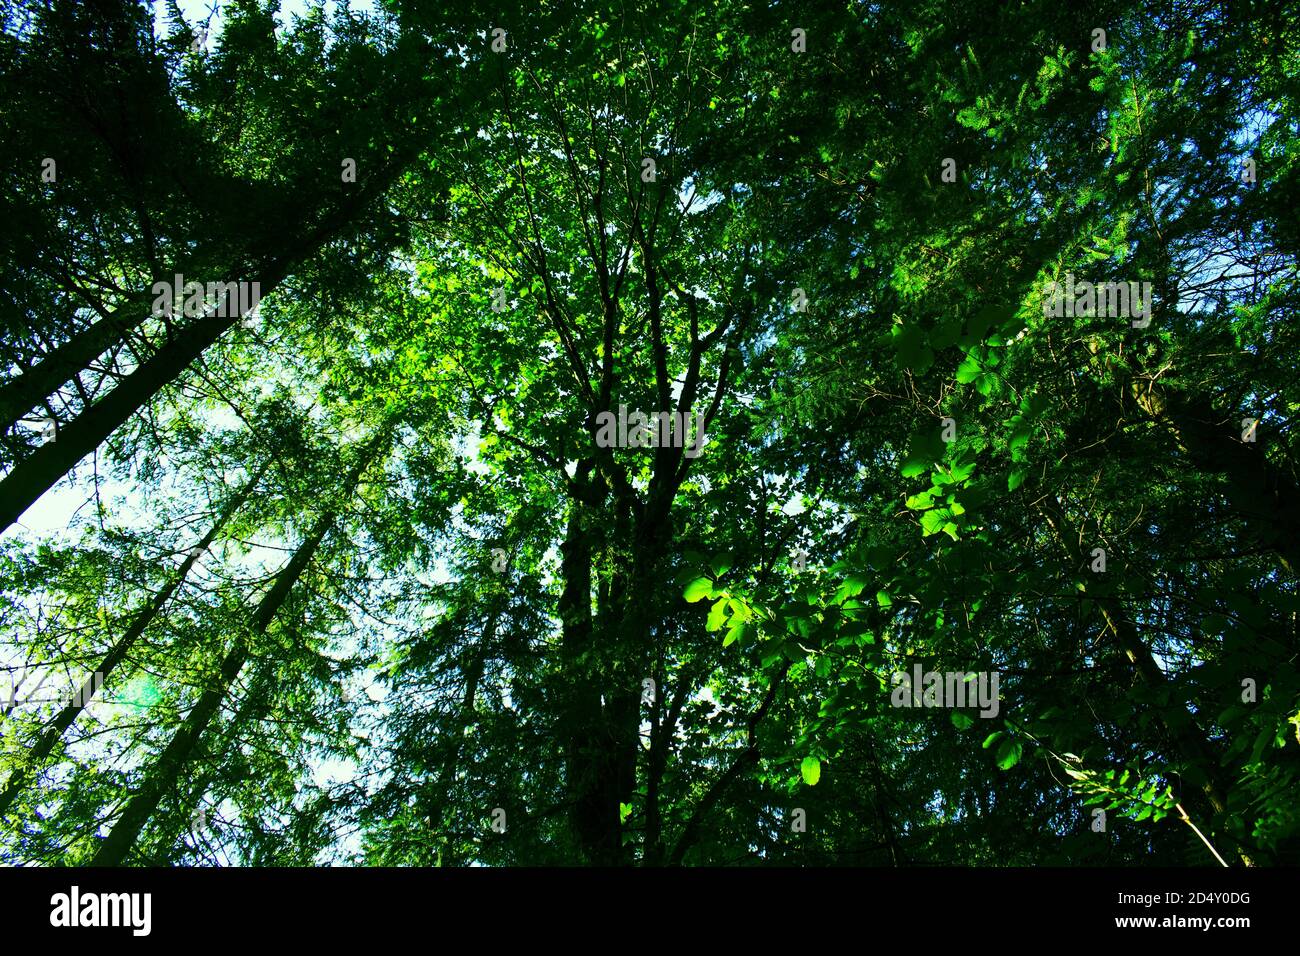 Looking up at the dense tree canopy in Germany Stock Photo